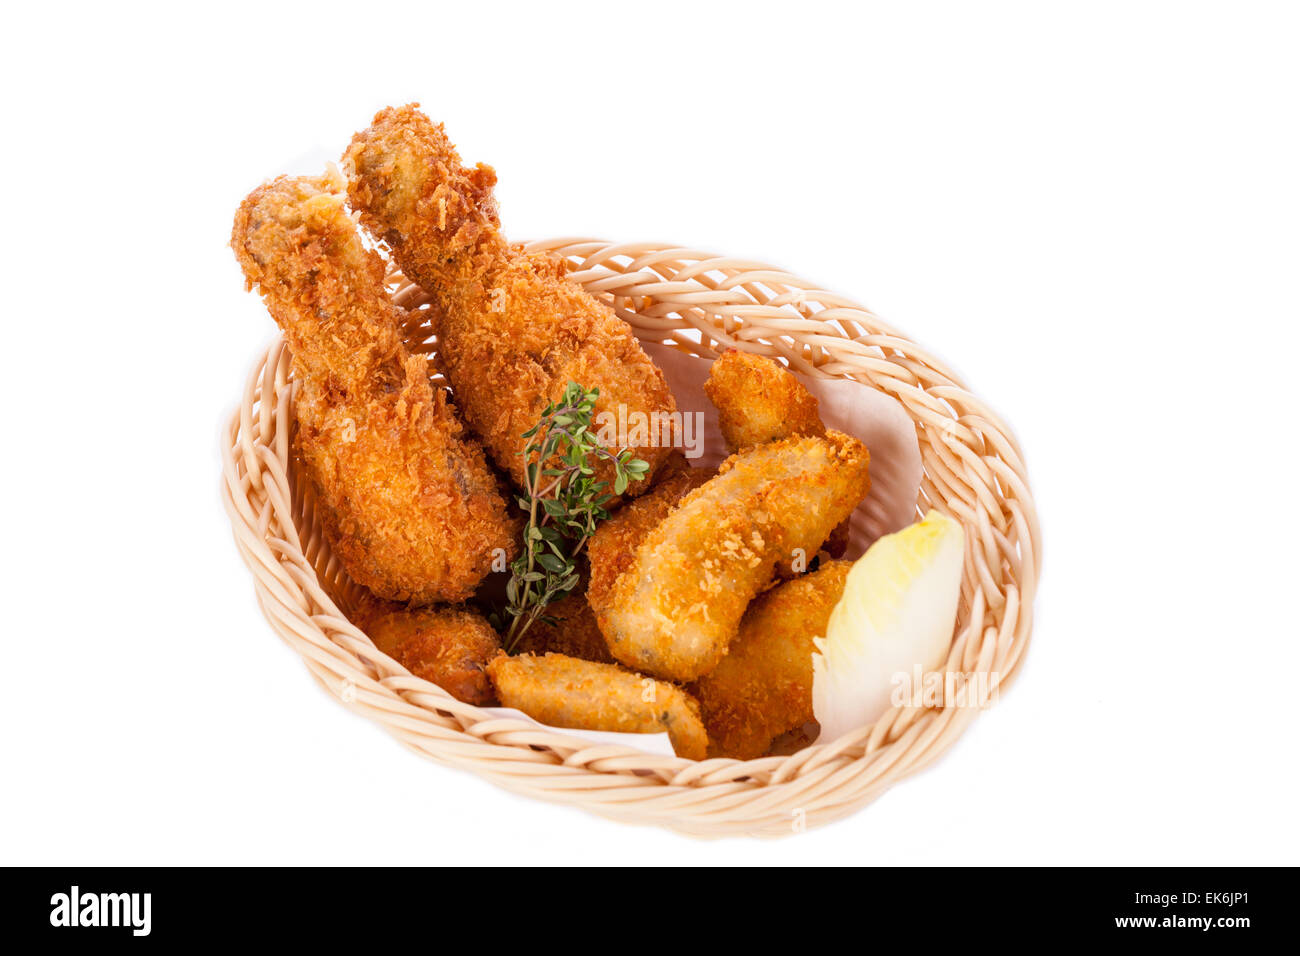 Crisp crunchy golden chicken legs and wings deep fried in bread crumbs and served with a bowl of dip in a wicker basket for a de Stock Photo